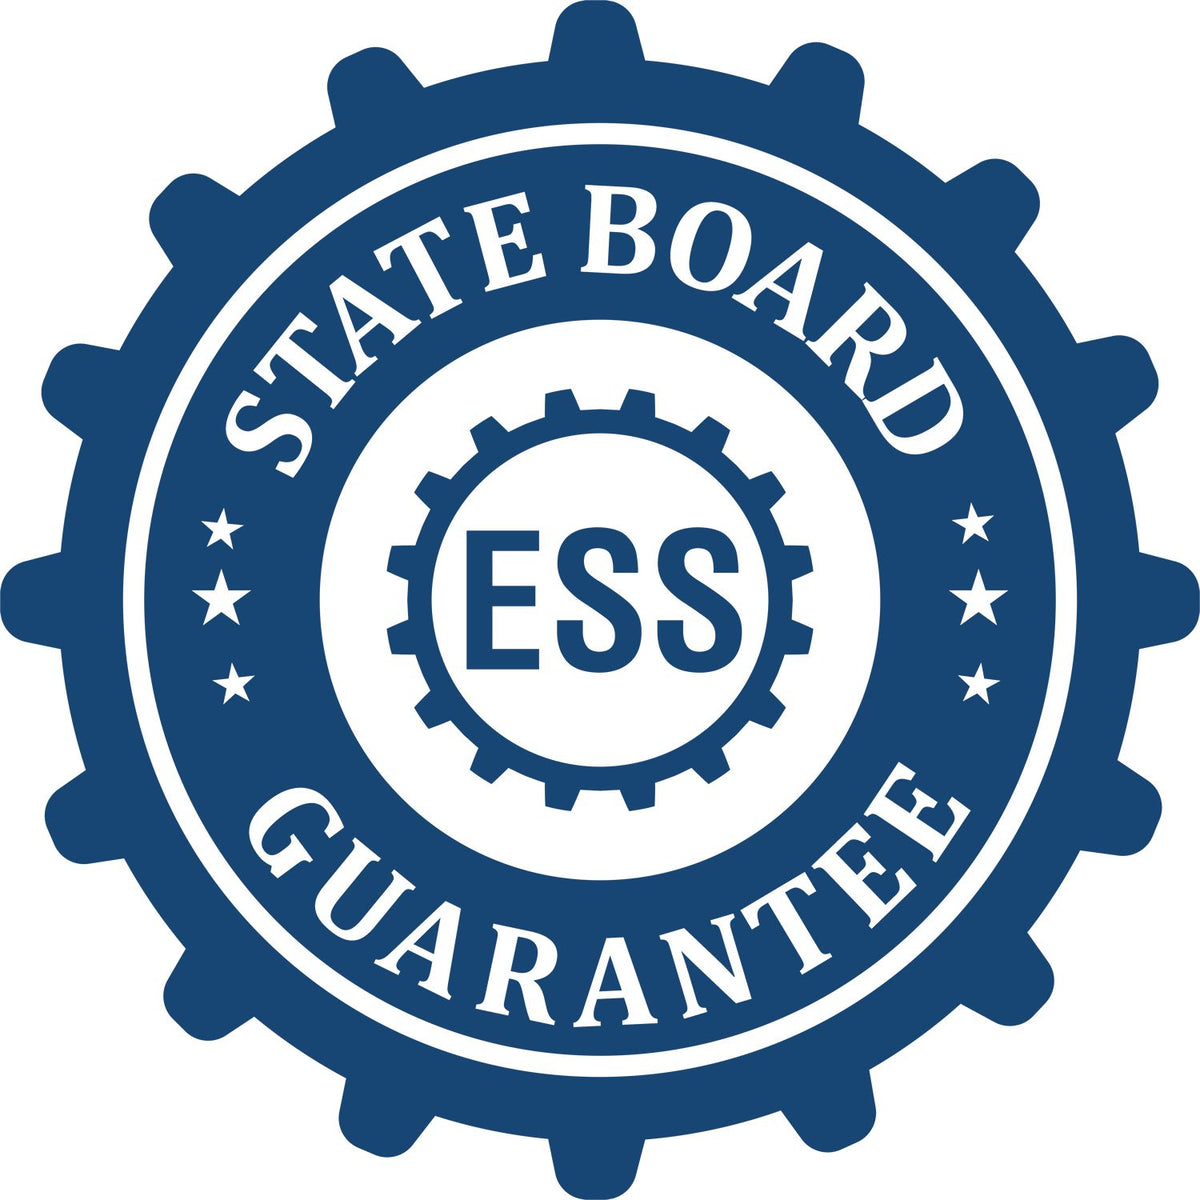 An emblem in a gear shape illustrating a state board guarantee for the Gift New Mexico Land Surveyor Seal